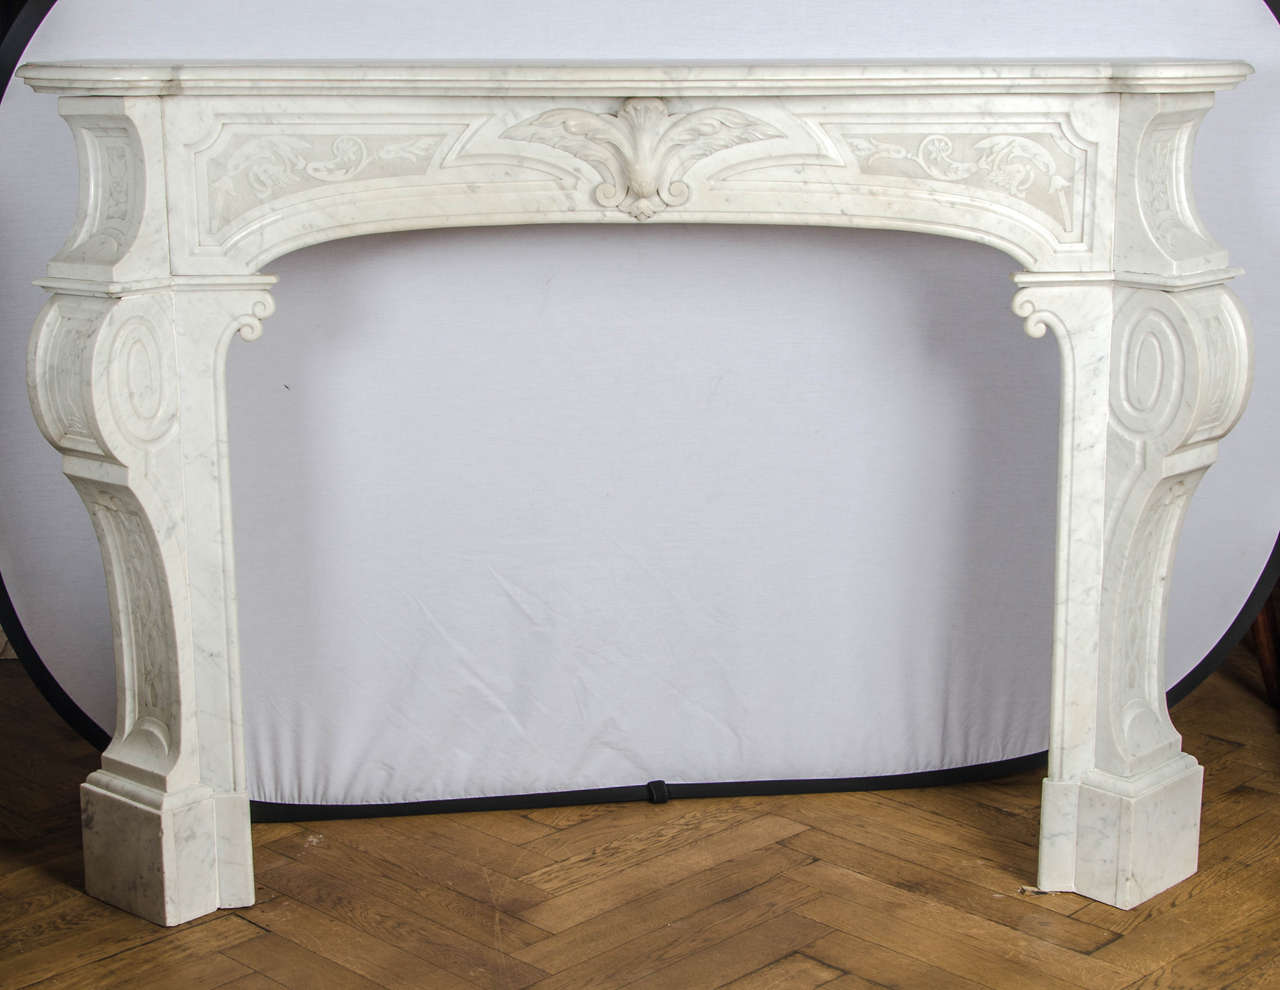 An antique marble fire surround in the style of Louis XV. This Carrara marble surround features s erpentine shelf atop angled, cabriole scrolling jambs which are decorated with finely carved designs of foliate and floral motifs. 

The opening